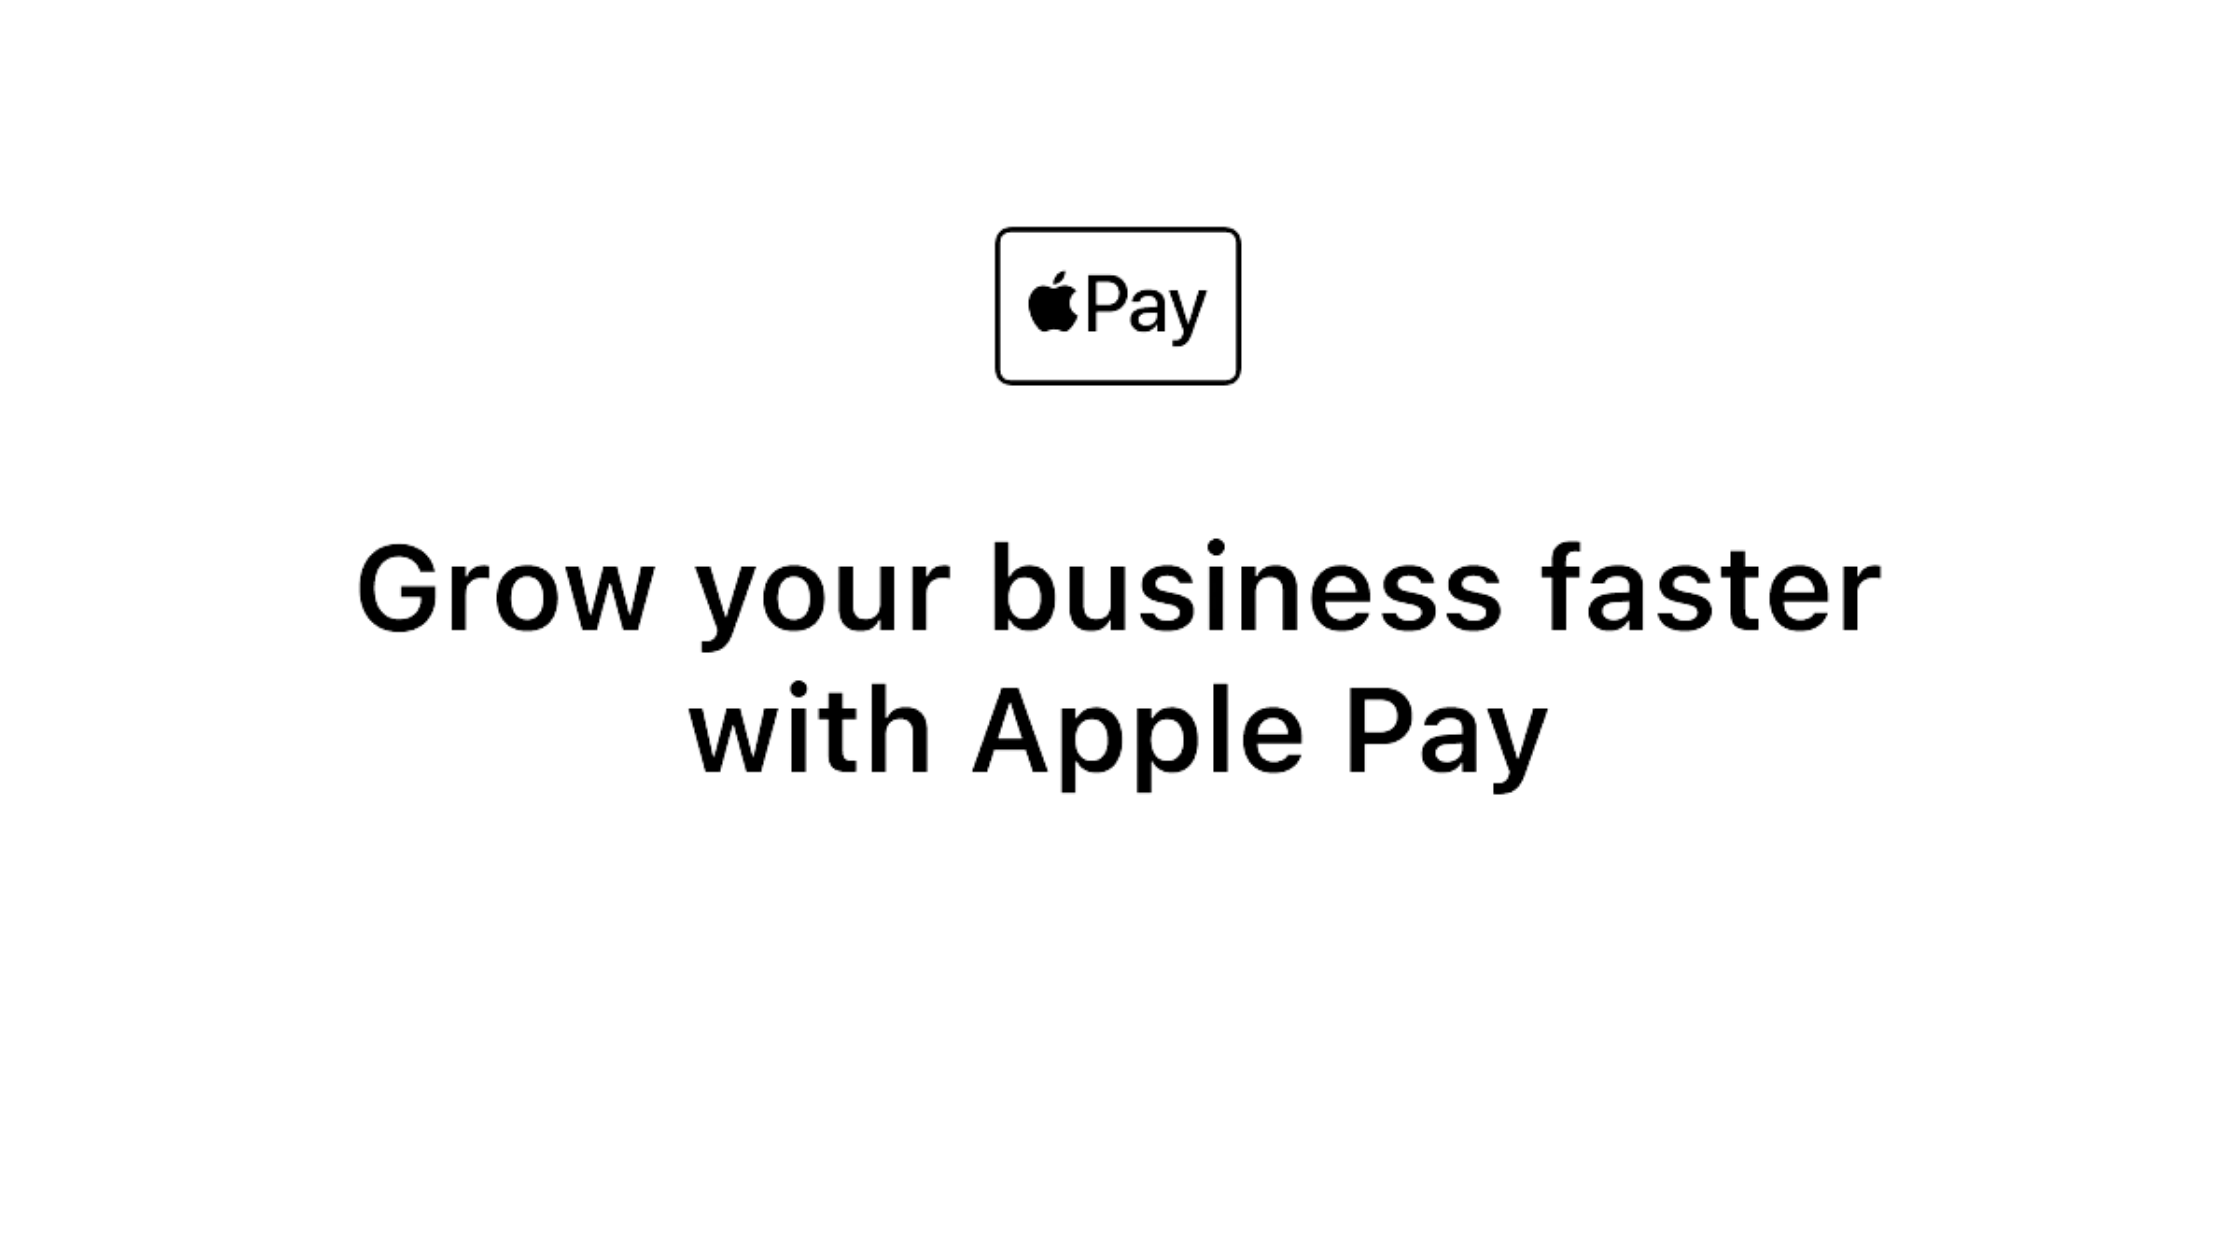 Peach Payments brings Apple Pay to South African businesses